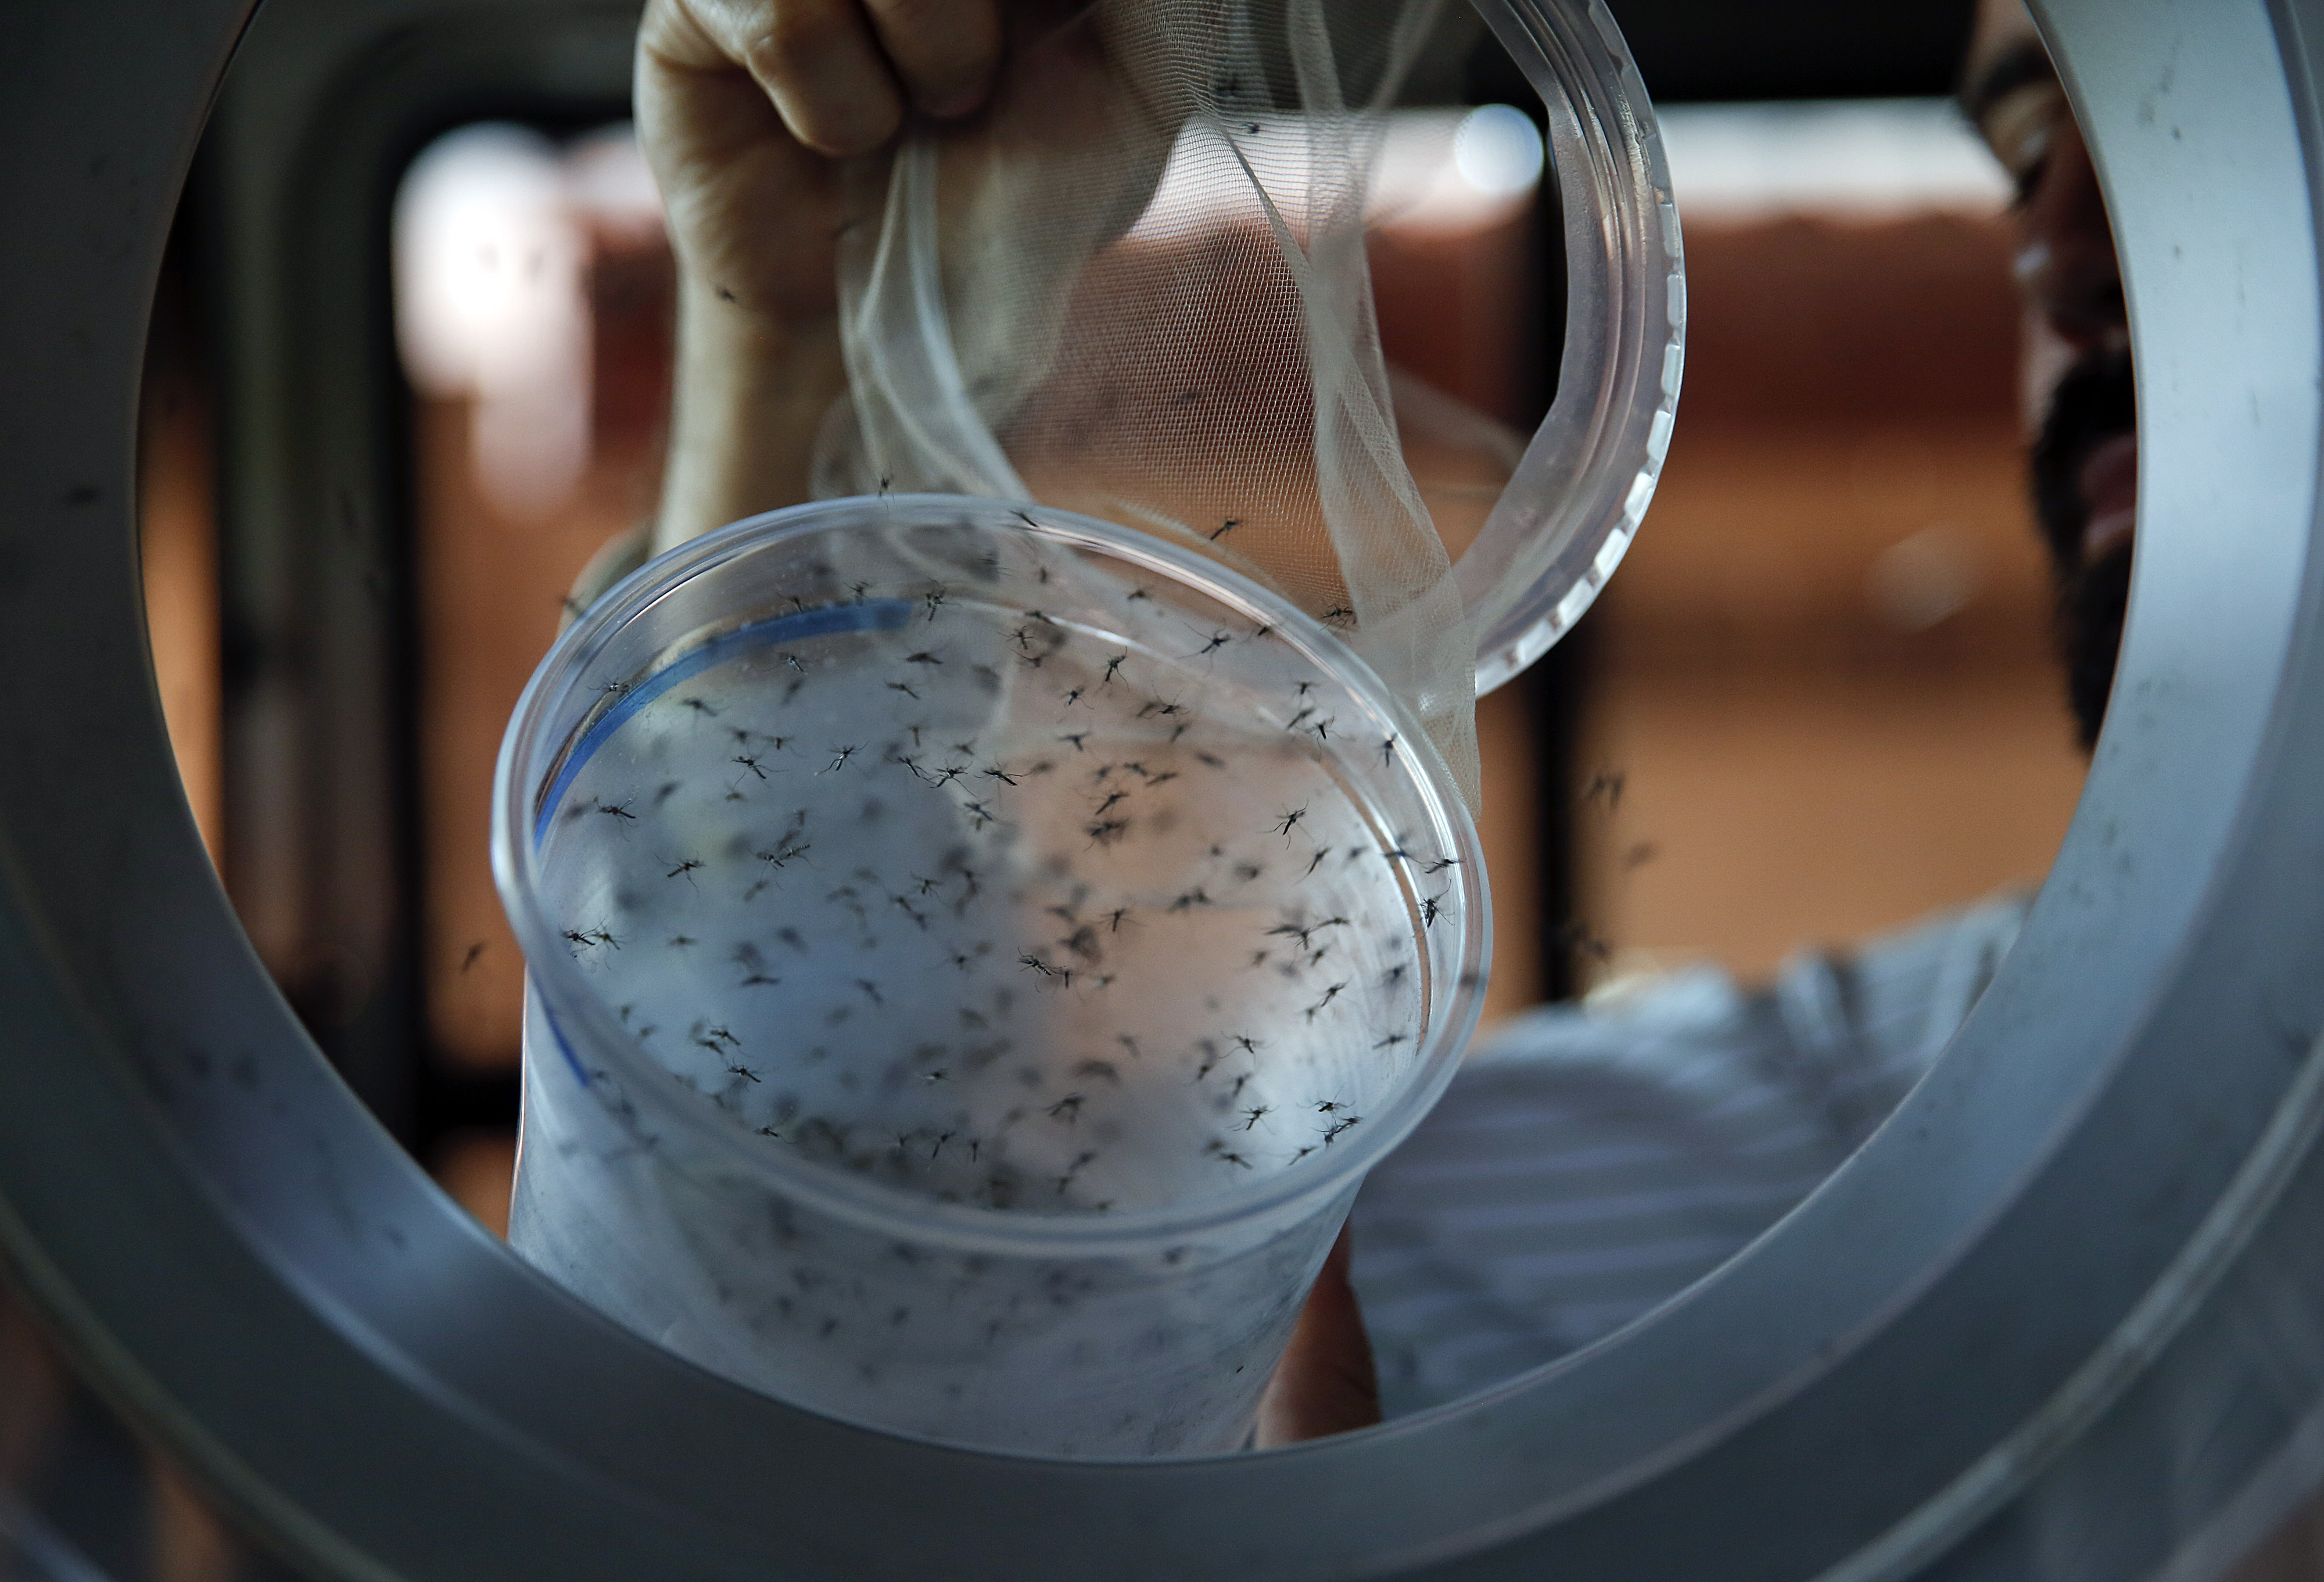 Researchers are ramping up their efforts to keep Zika under control.